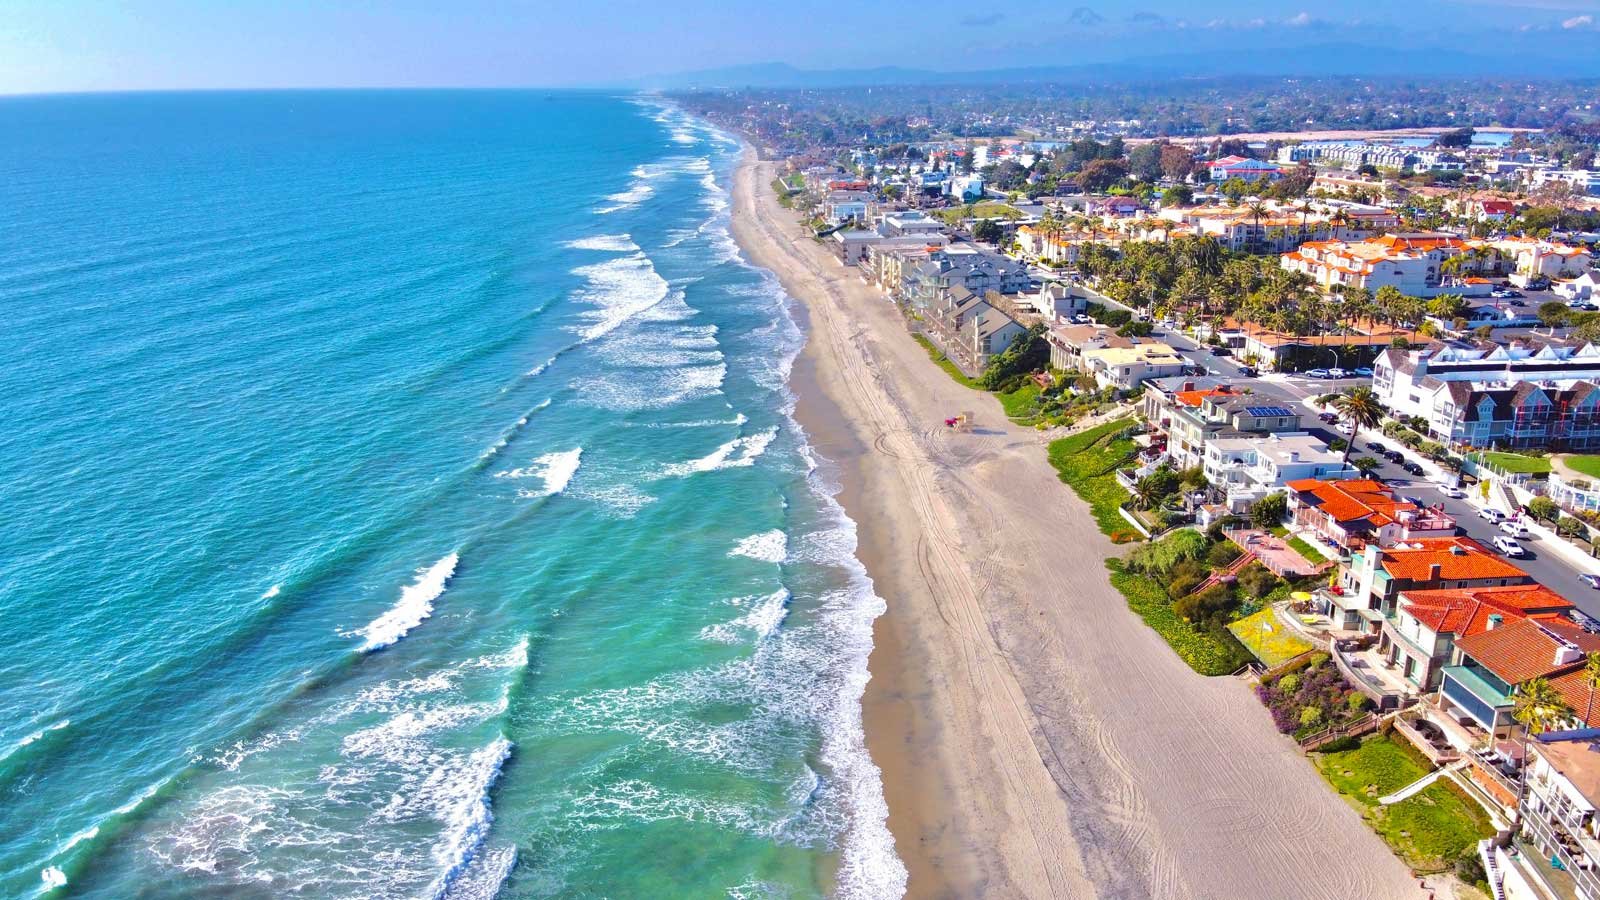 Don’t Miss These 10 Things to Do in California